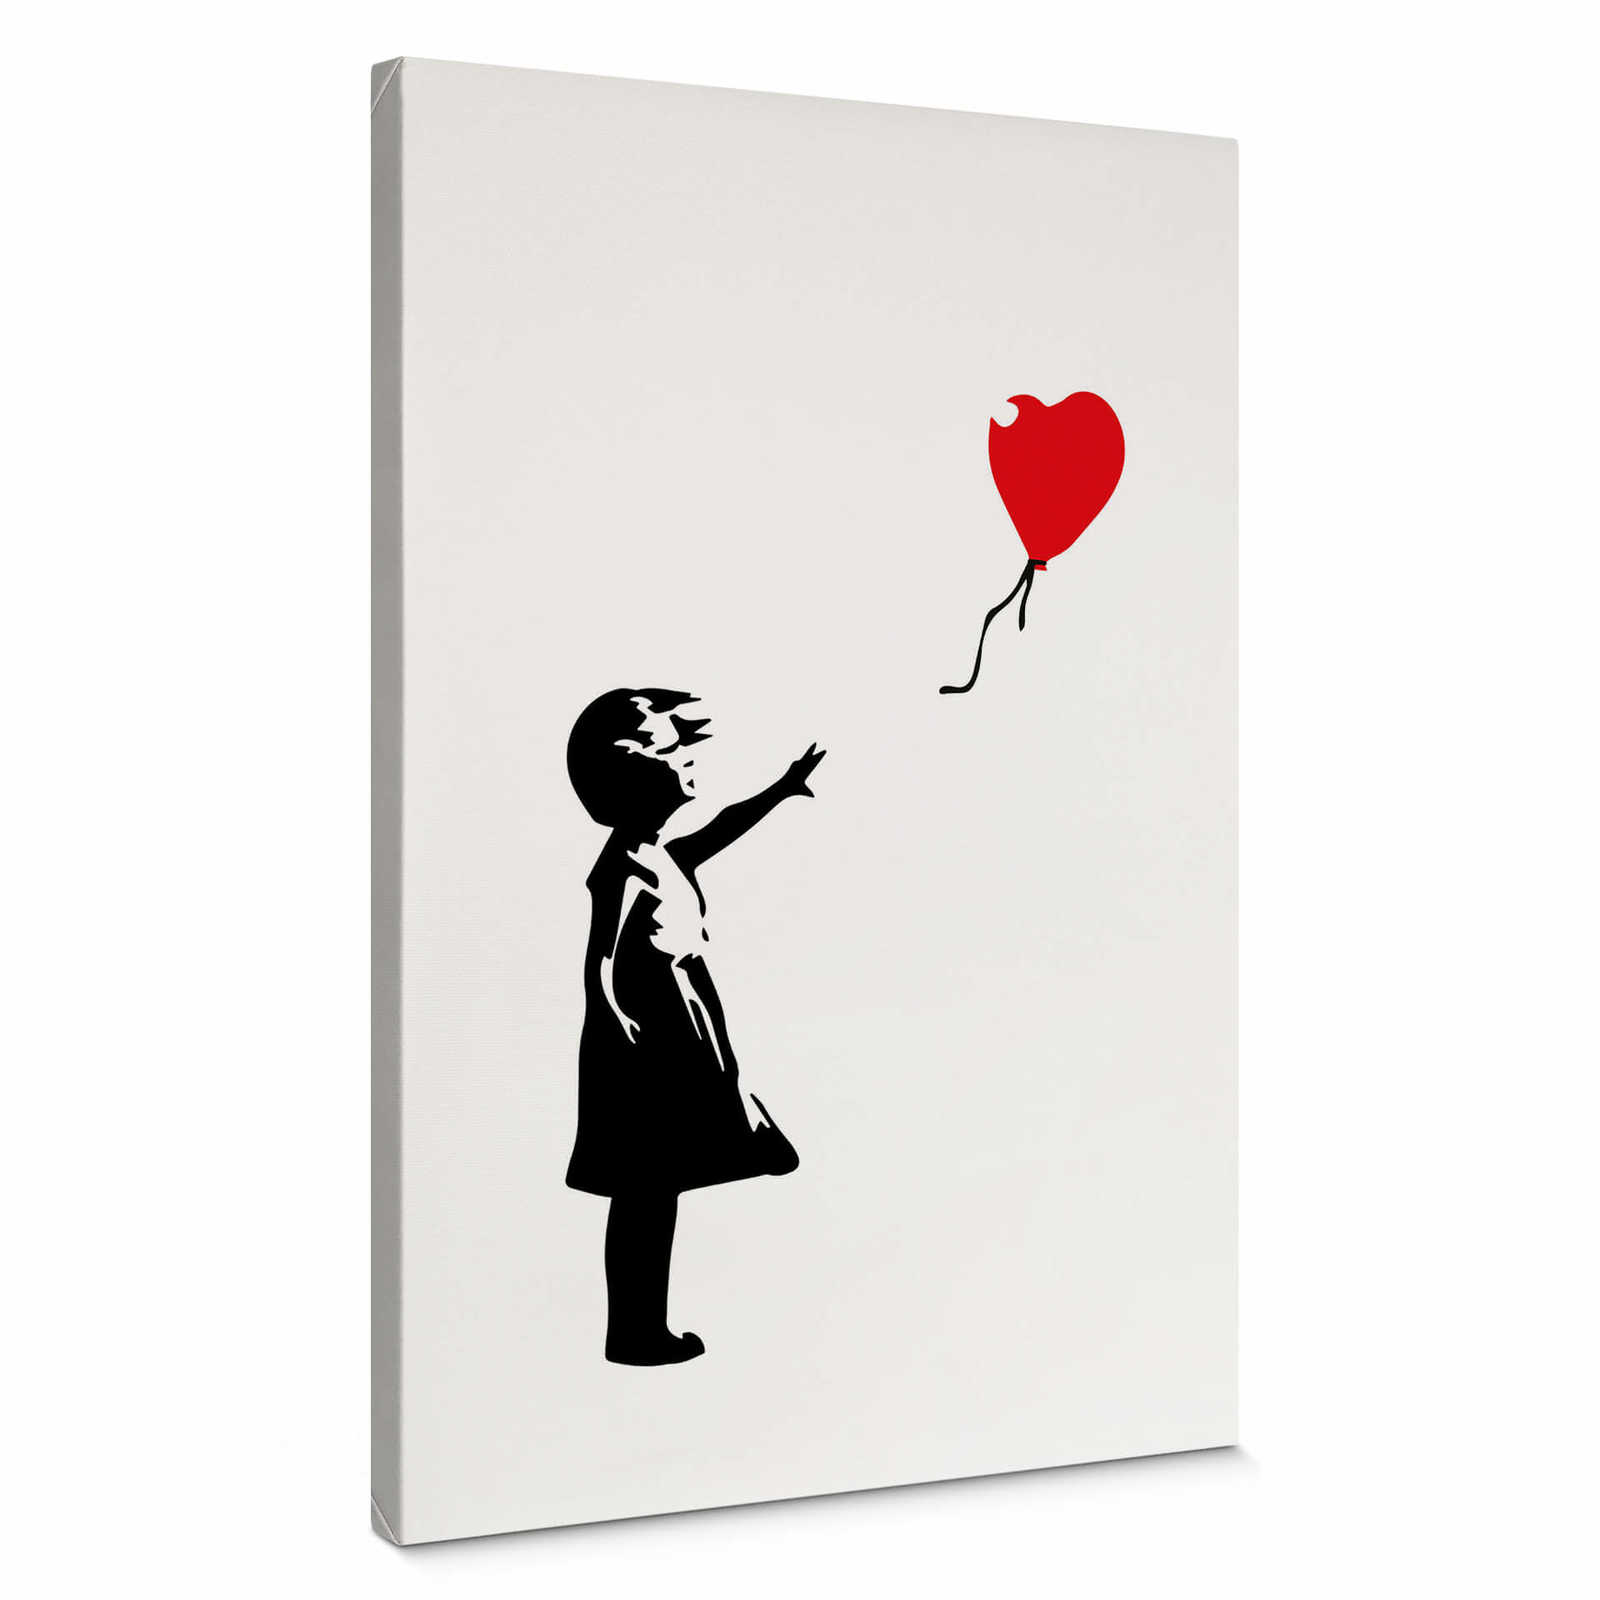         Canvas print "Girl with a red balloon" by Banksy
    